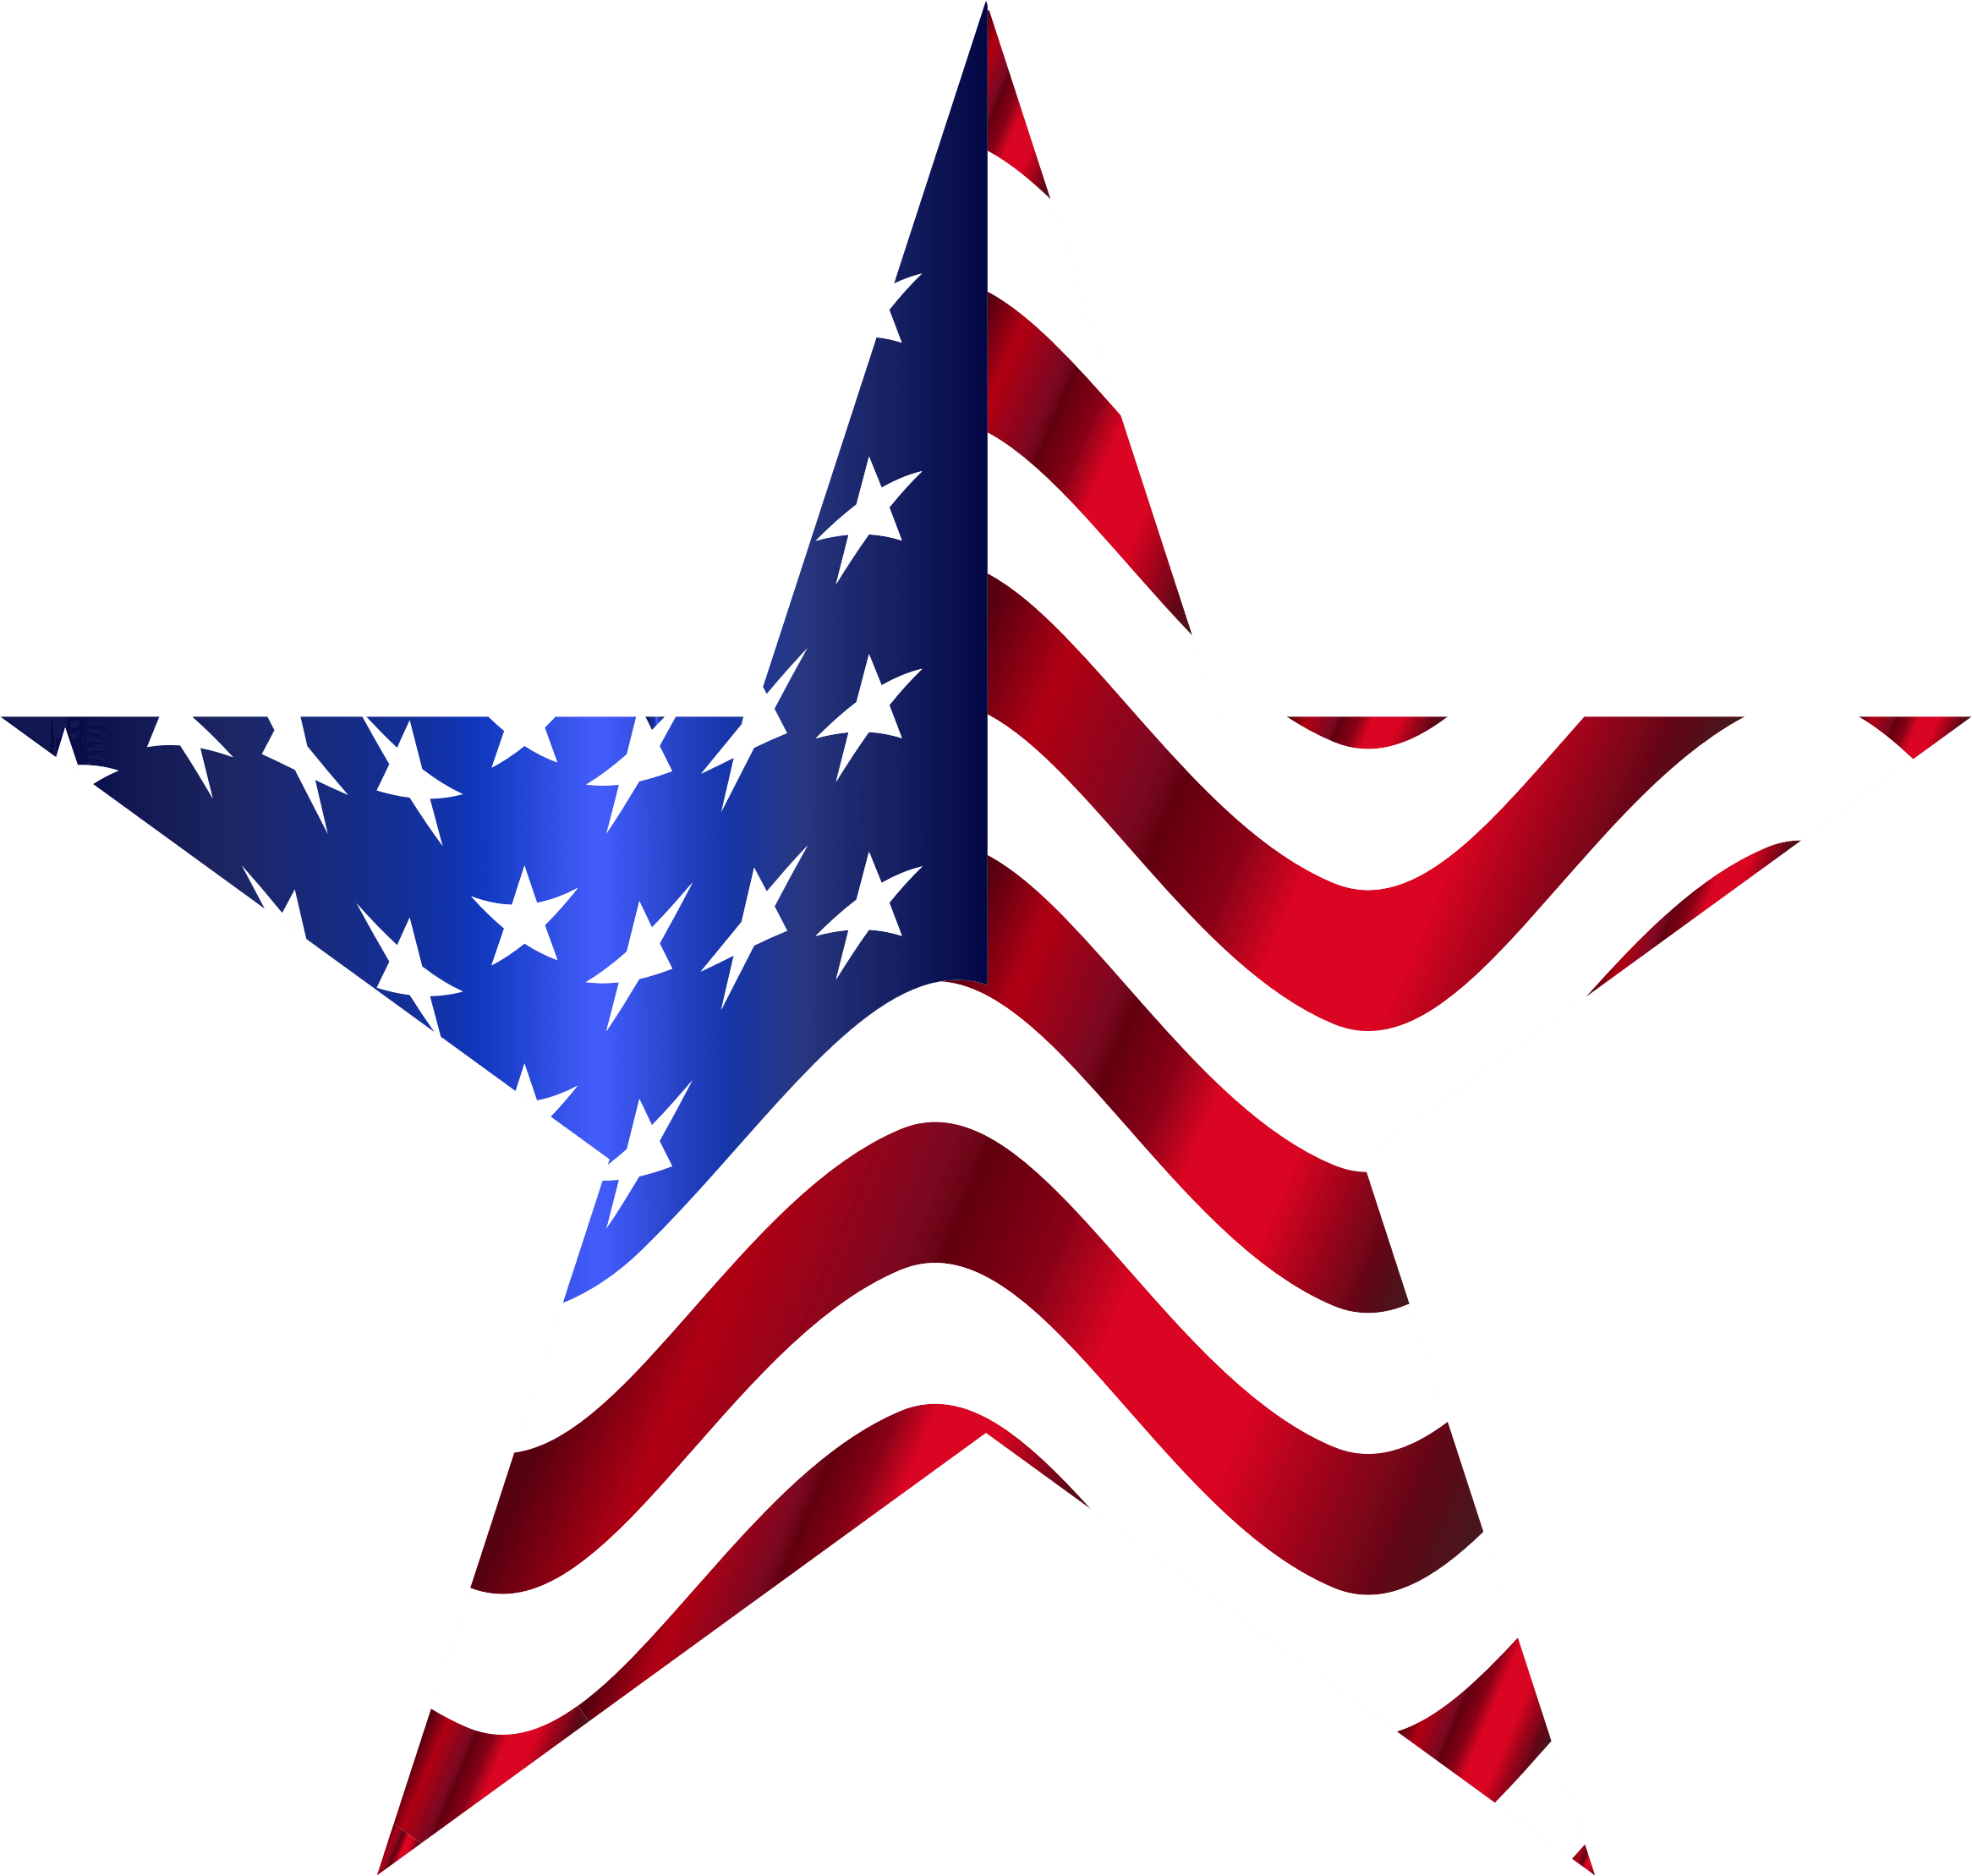 Flag Usa Png - ClipArt Best